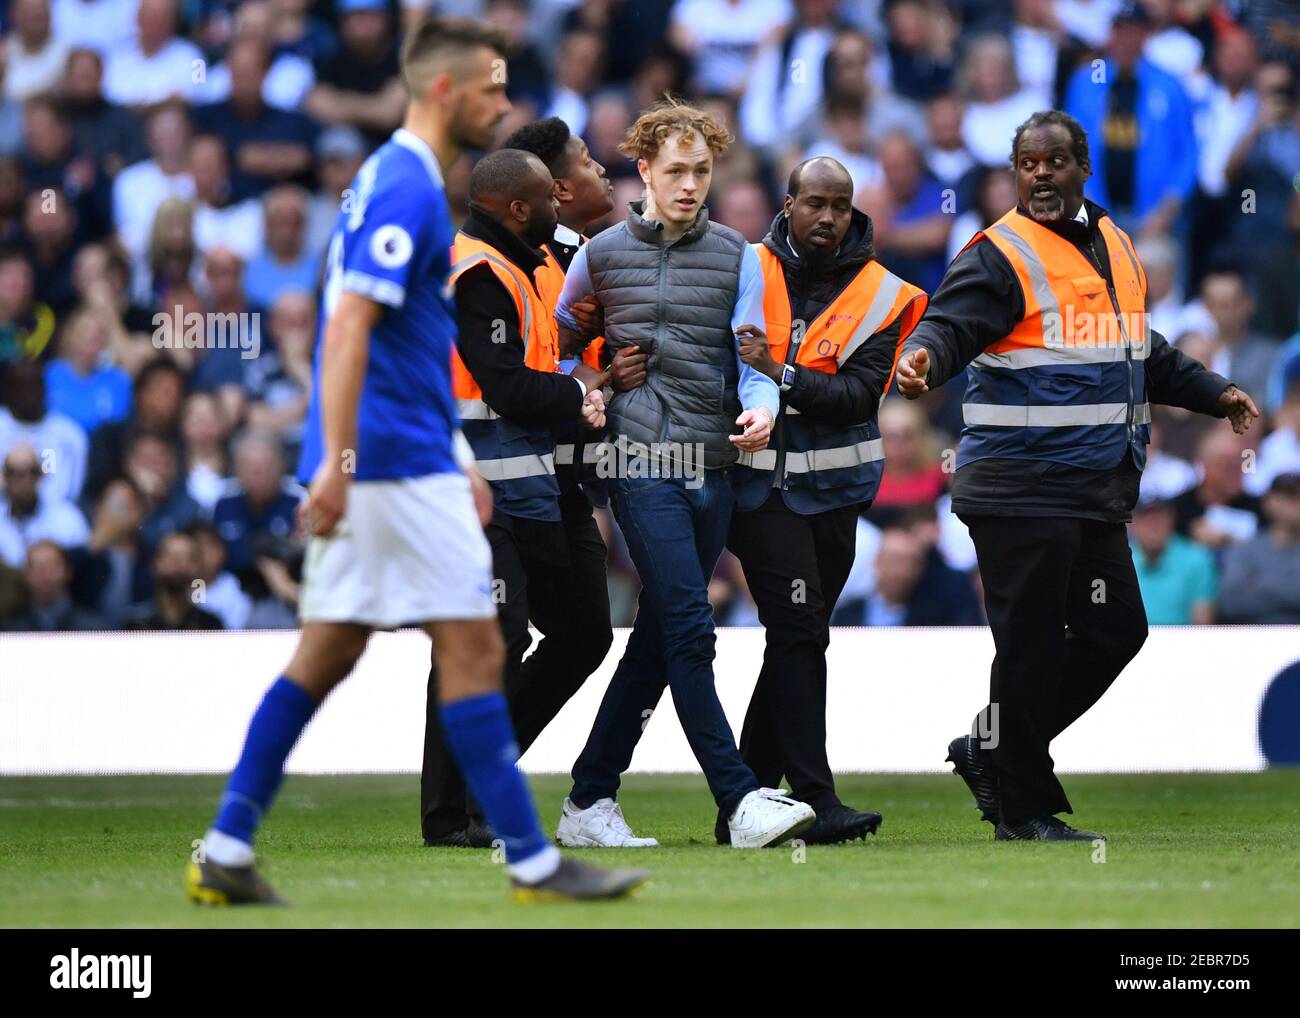 Soccer Football - Premier League - Tottenham Hotspur v Everton - Tottenham Hotspur Stadium, London, Britain - May 12, 2019  Stewards escort a pitch invader away REUTERS/Dylan Martinez  EDITORIAL USE ONLY. No use with unauthorized audio, video, data, fixture lists, club/league logos or 'live' services. Online in-match use limited to 75 images, no video emulation. No use in betting, games or single club/league/player publications.  Please contact your account representative for further details. Stock Photo